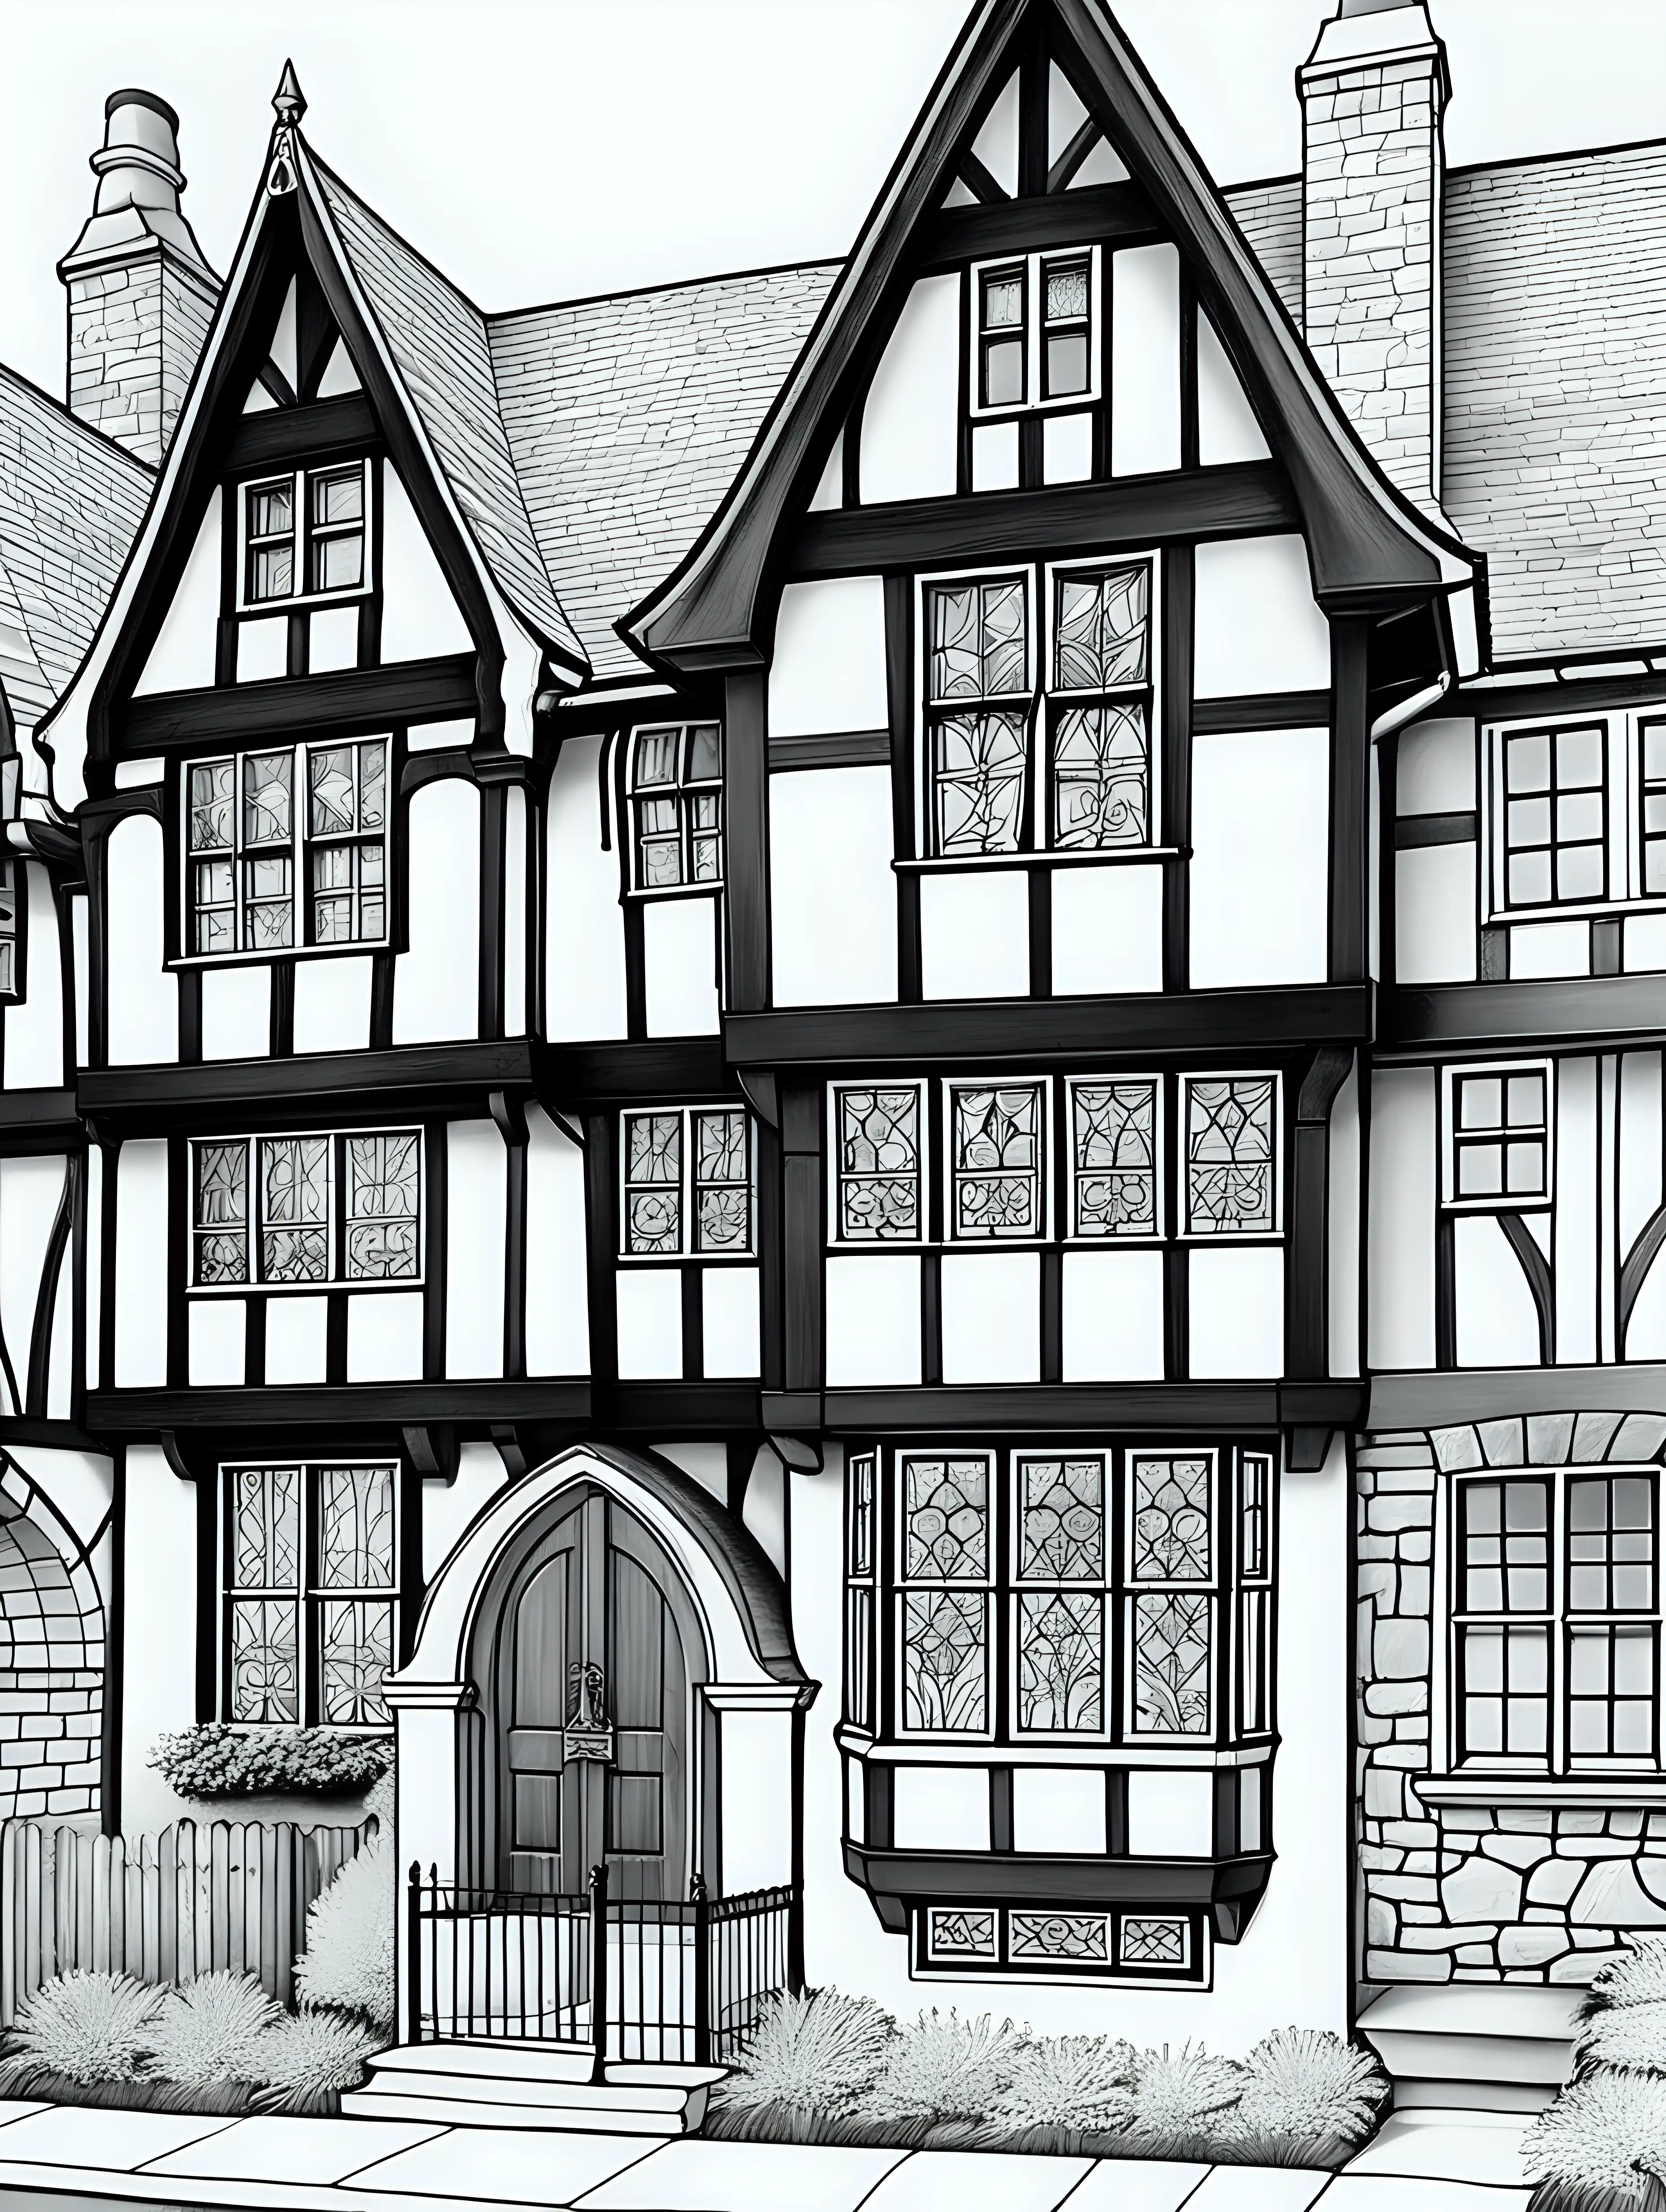 TudorStyle Townhouse Coloring Page for Kids